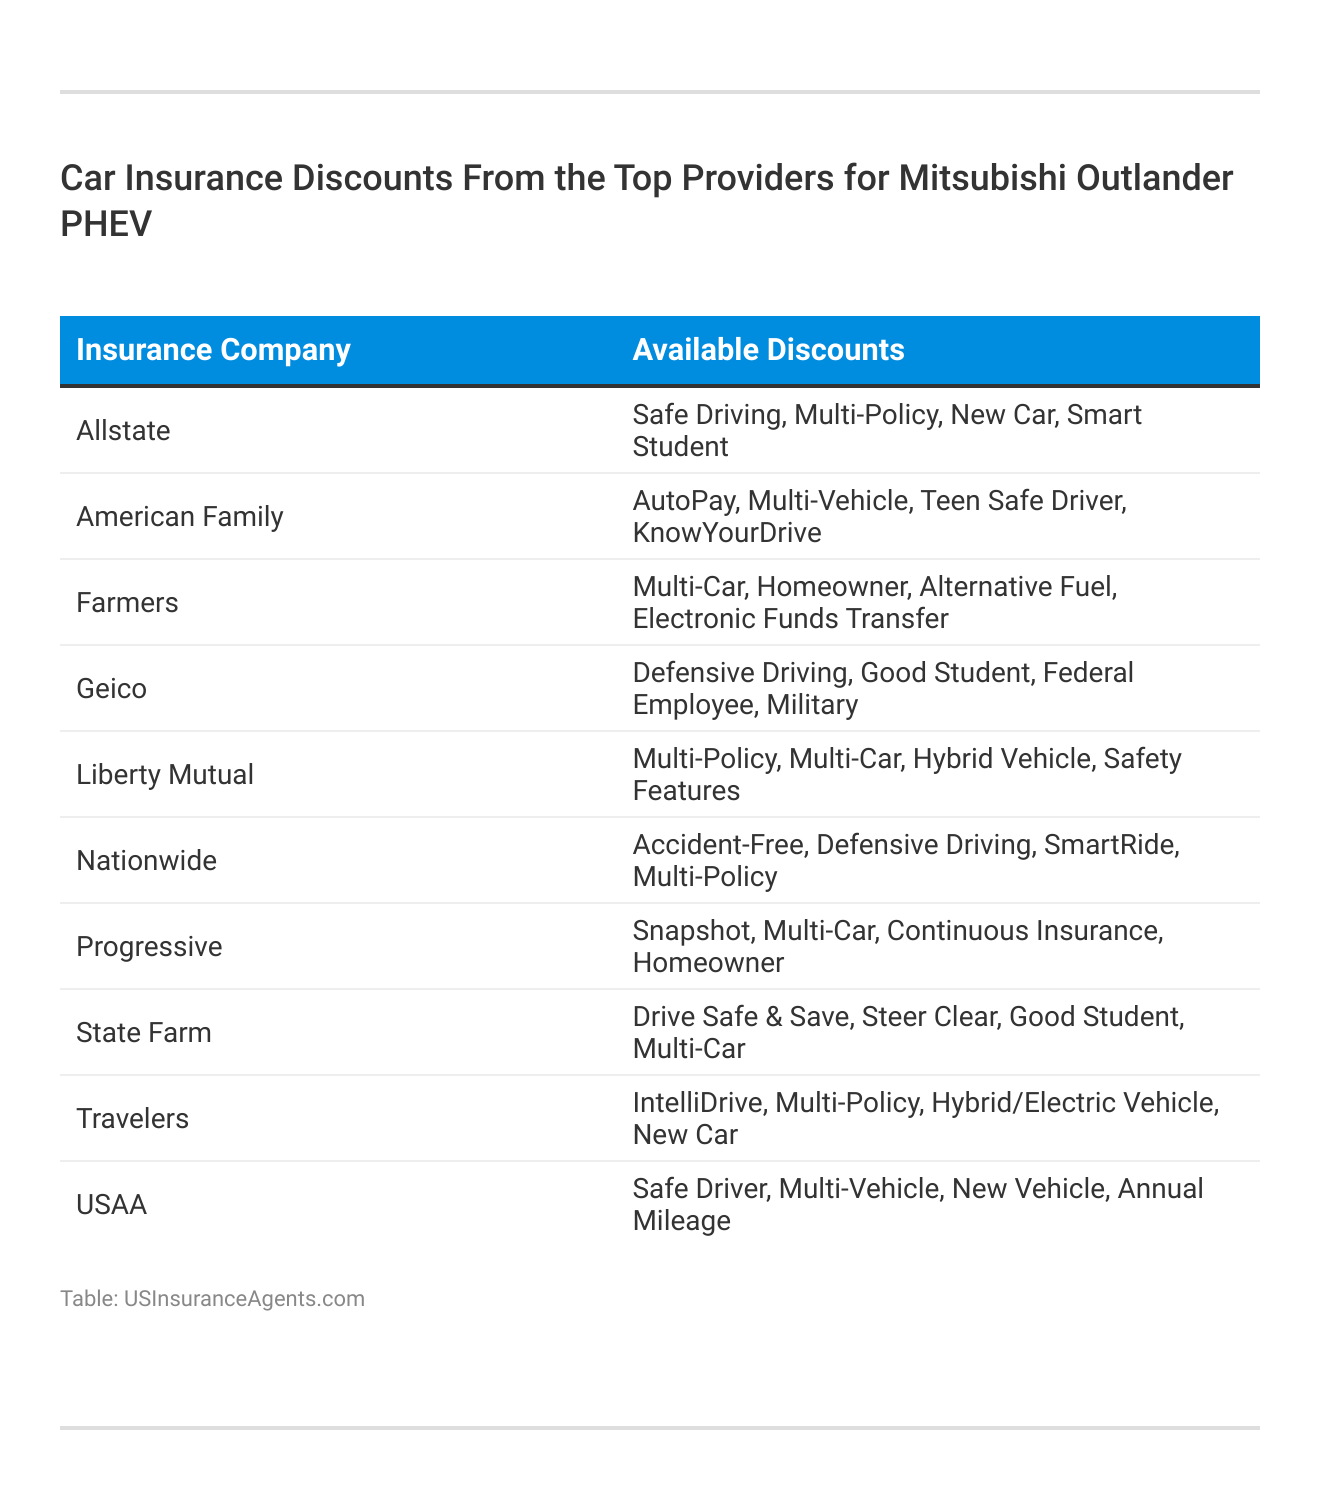 <h3>Car Insurance Discounts From the Top Providers for Mitsubishi Outlander PHEV</h3>